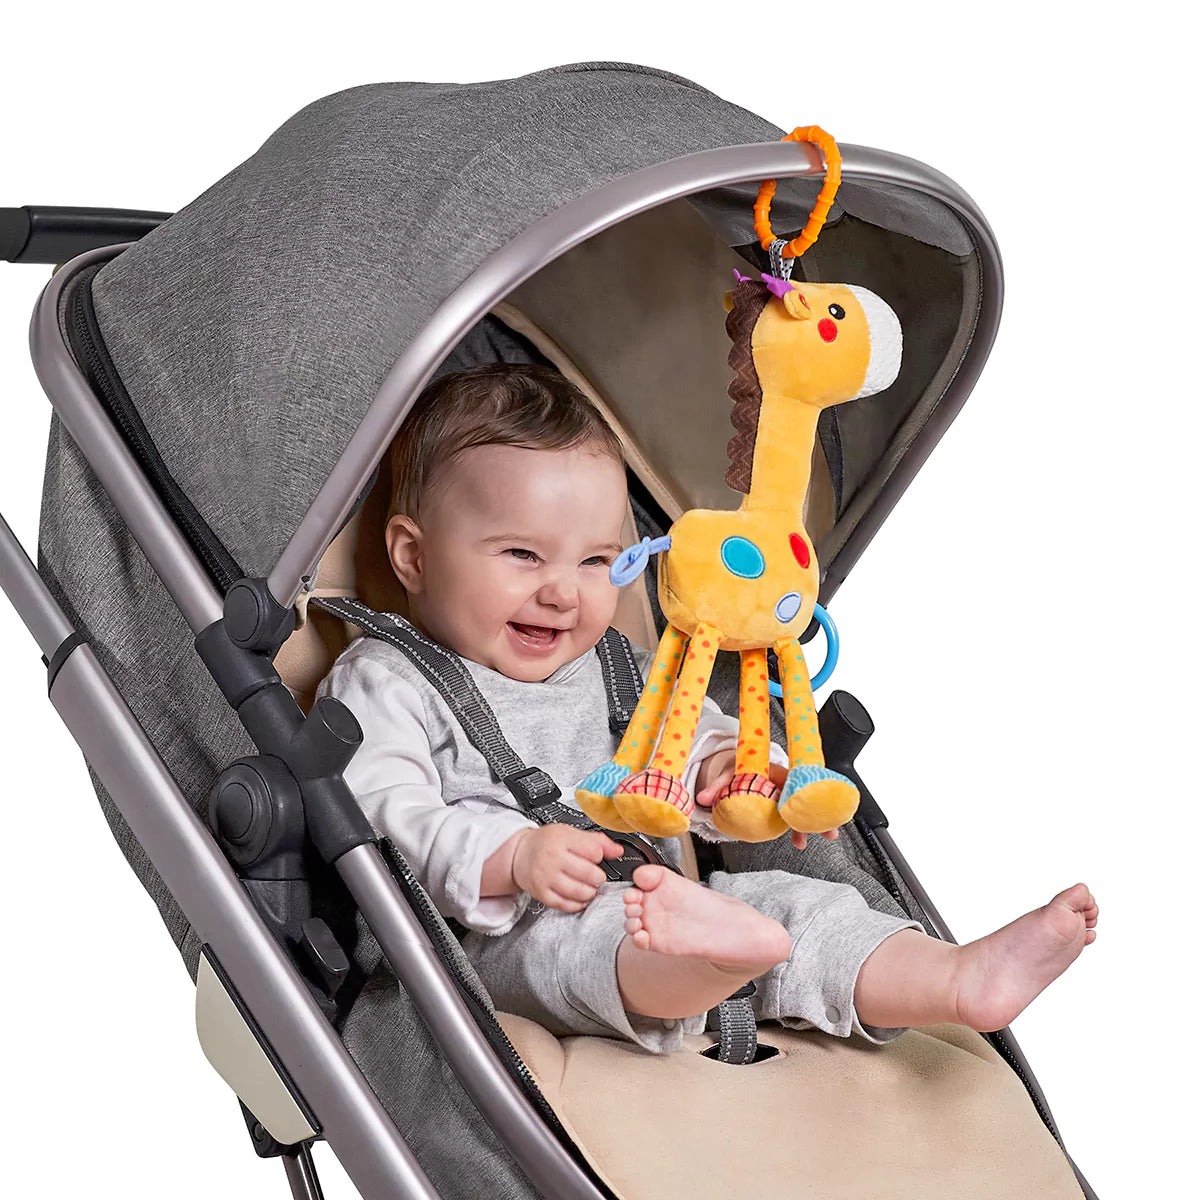 Giraffe Hanging rattle toy, soft baby hanging toy with teether, stroller car seat crib plush activity toys for newborn infant 0 Month+